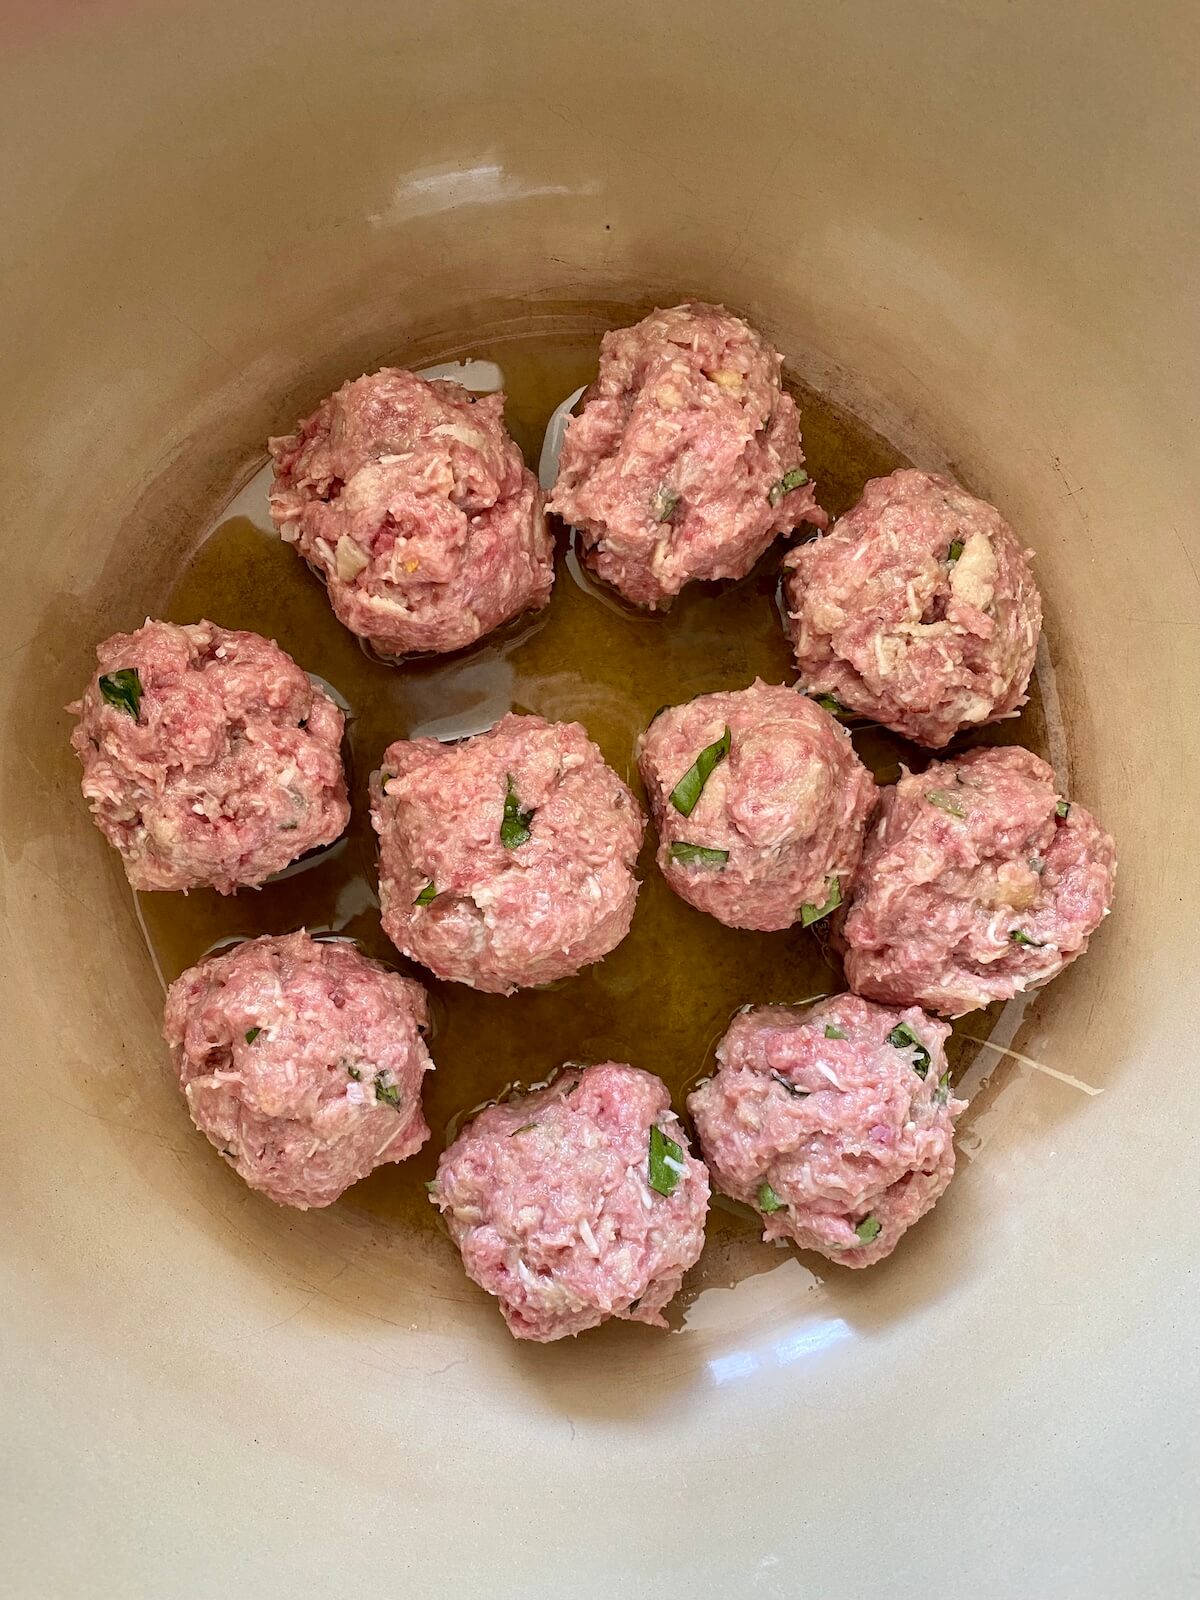 Raw meatballs being seared in olive oil in a dutch oven.